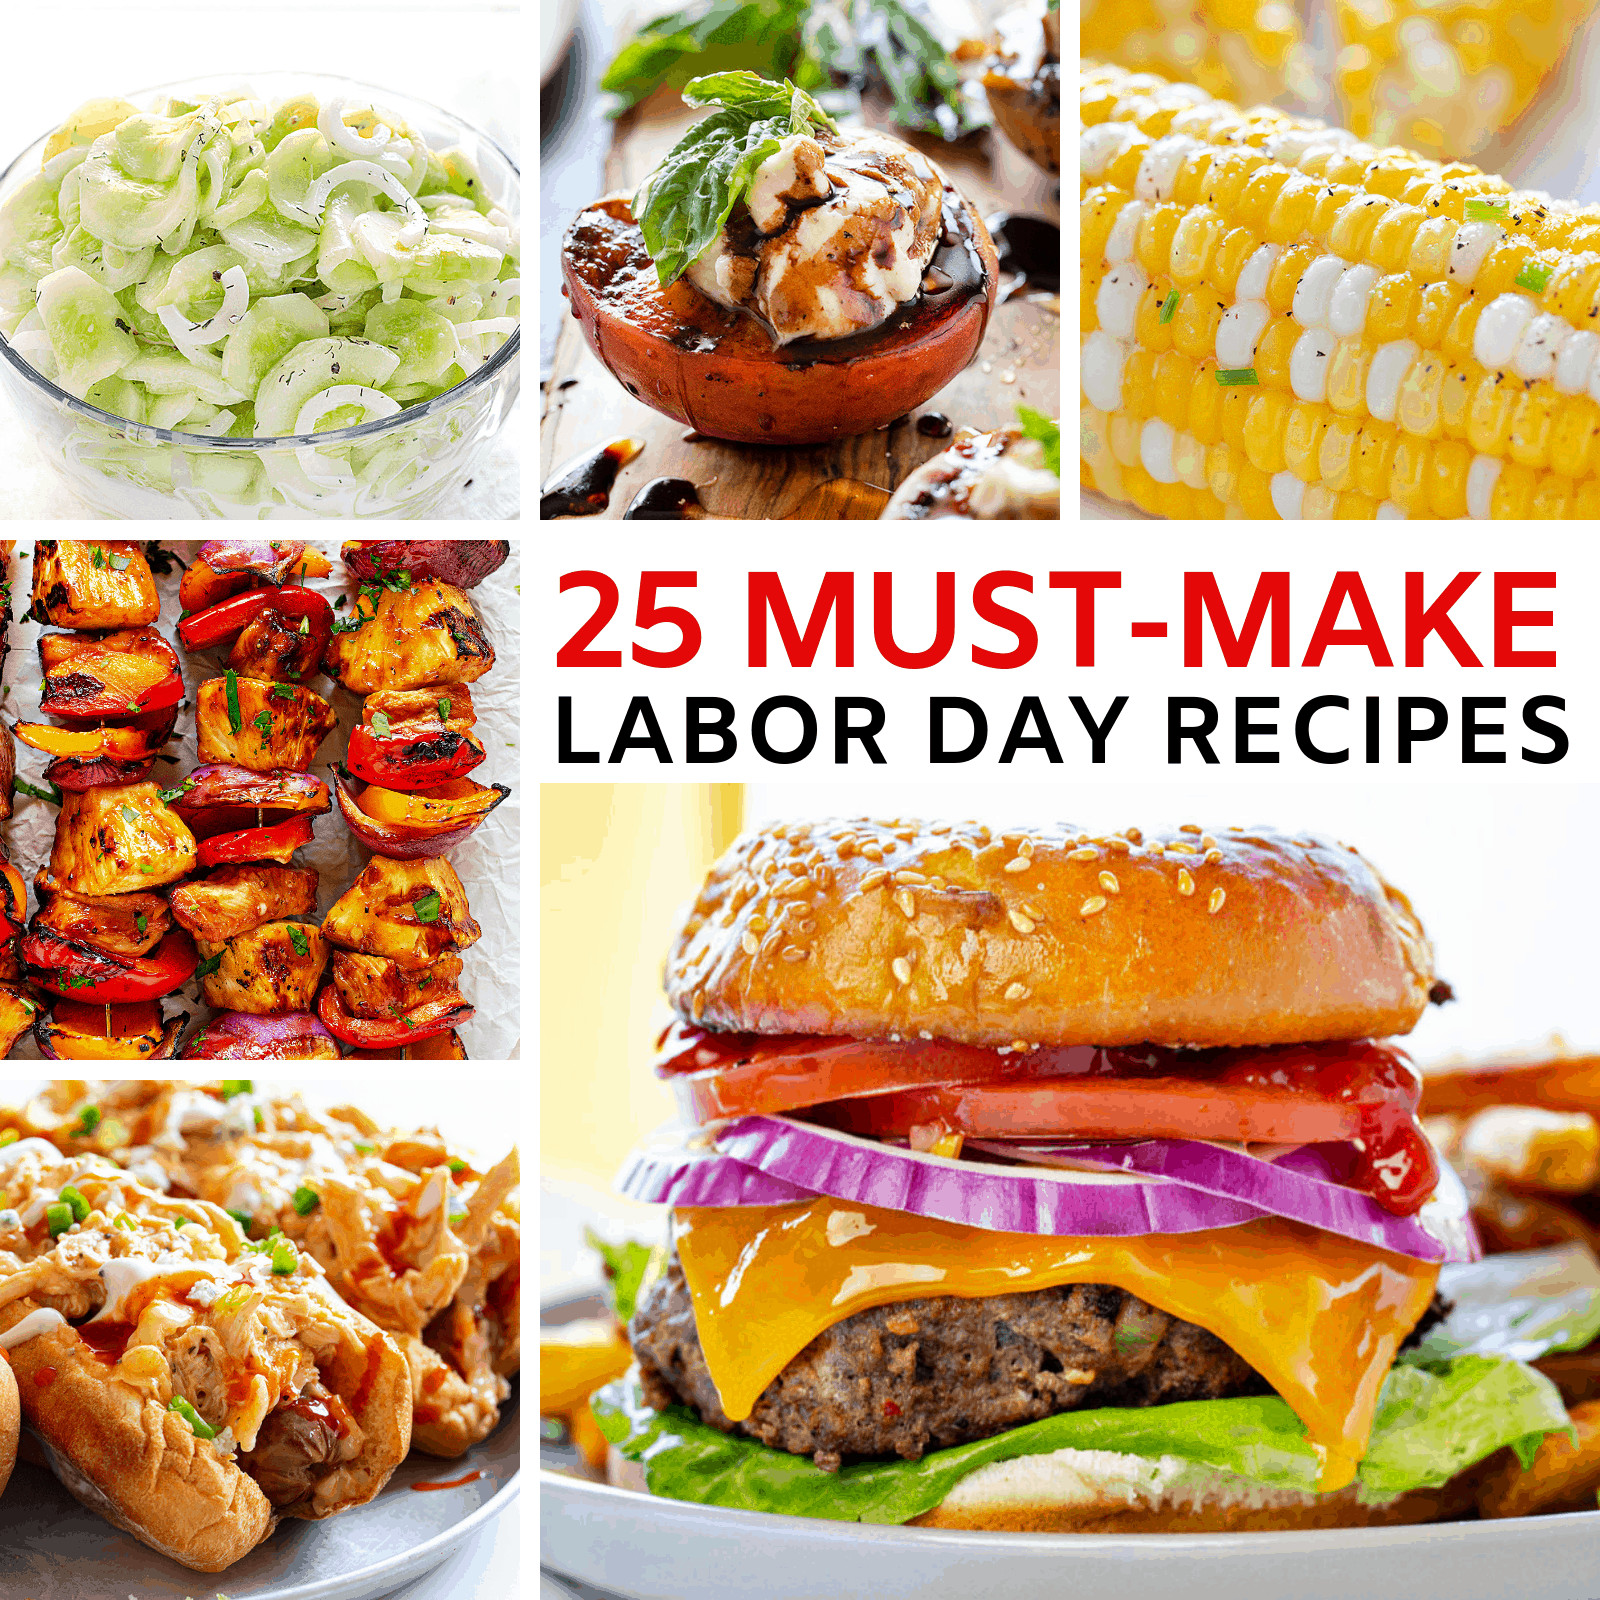 Labor Day Meal Ideas
 25 Best Labor Day Food Ideas for 2019